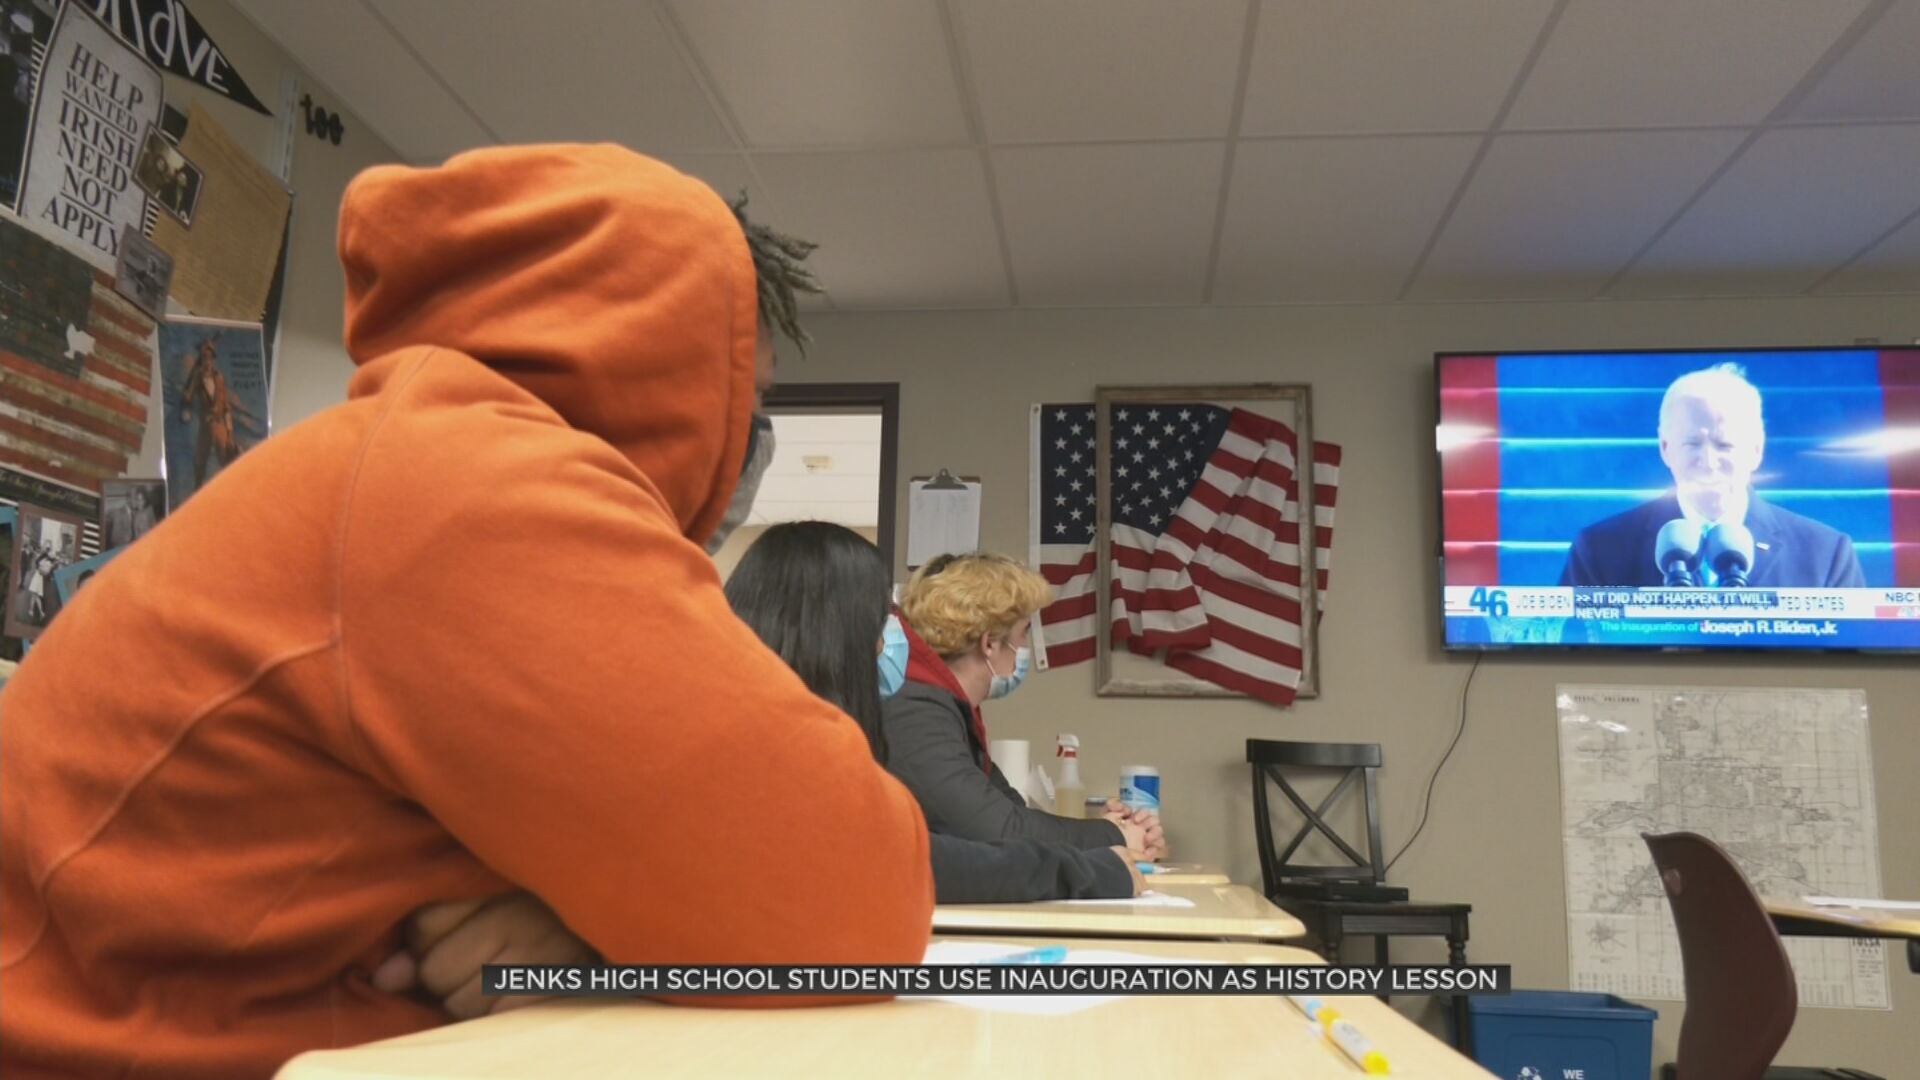 Jenks High School Students Had Eyes On History Using Inauguration As Lesson 